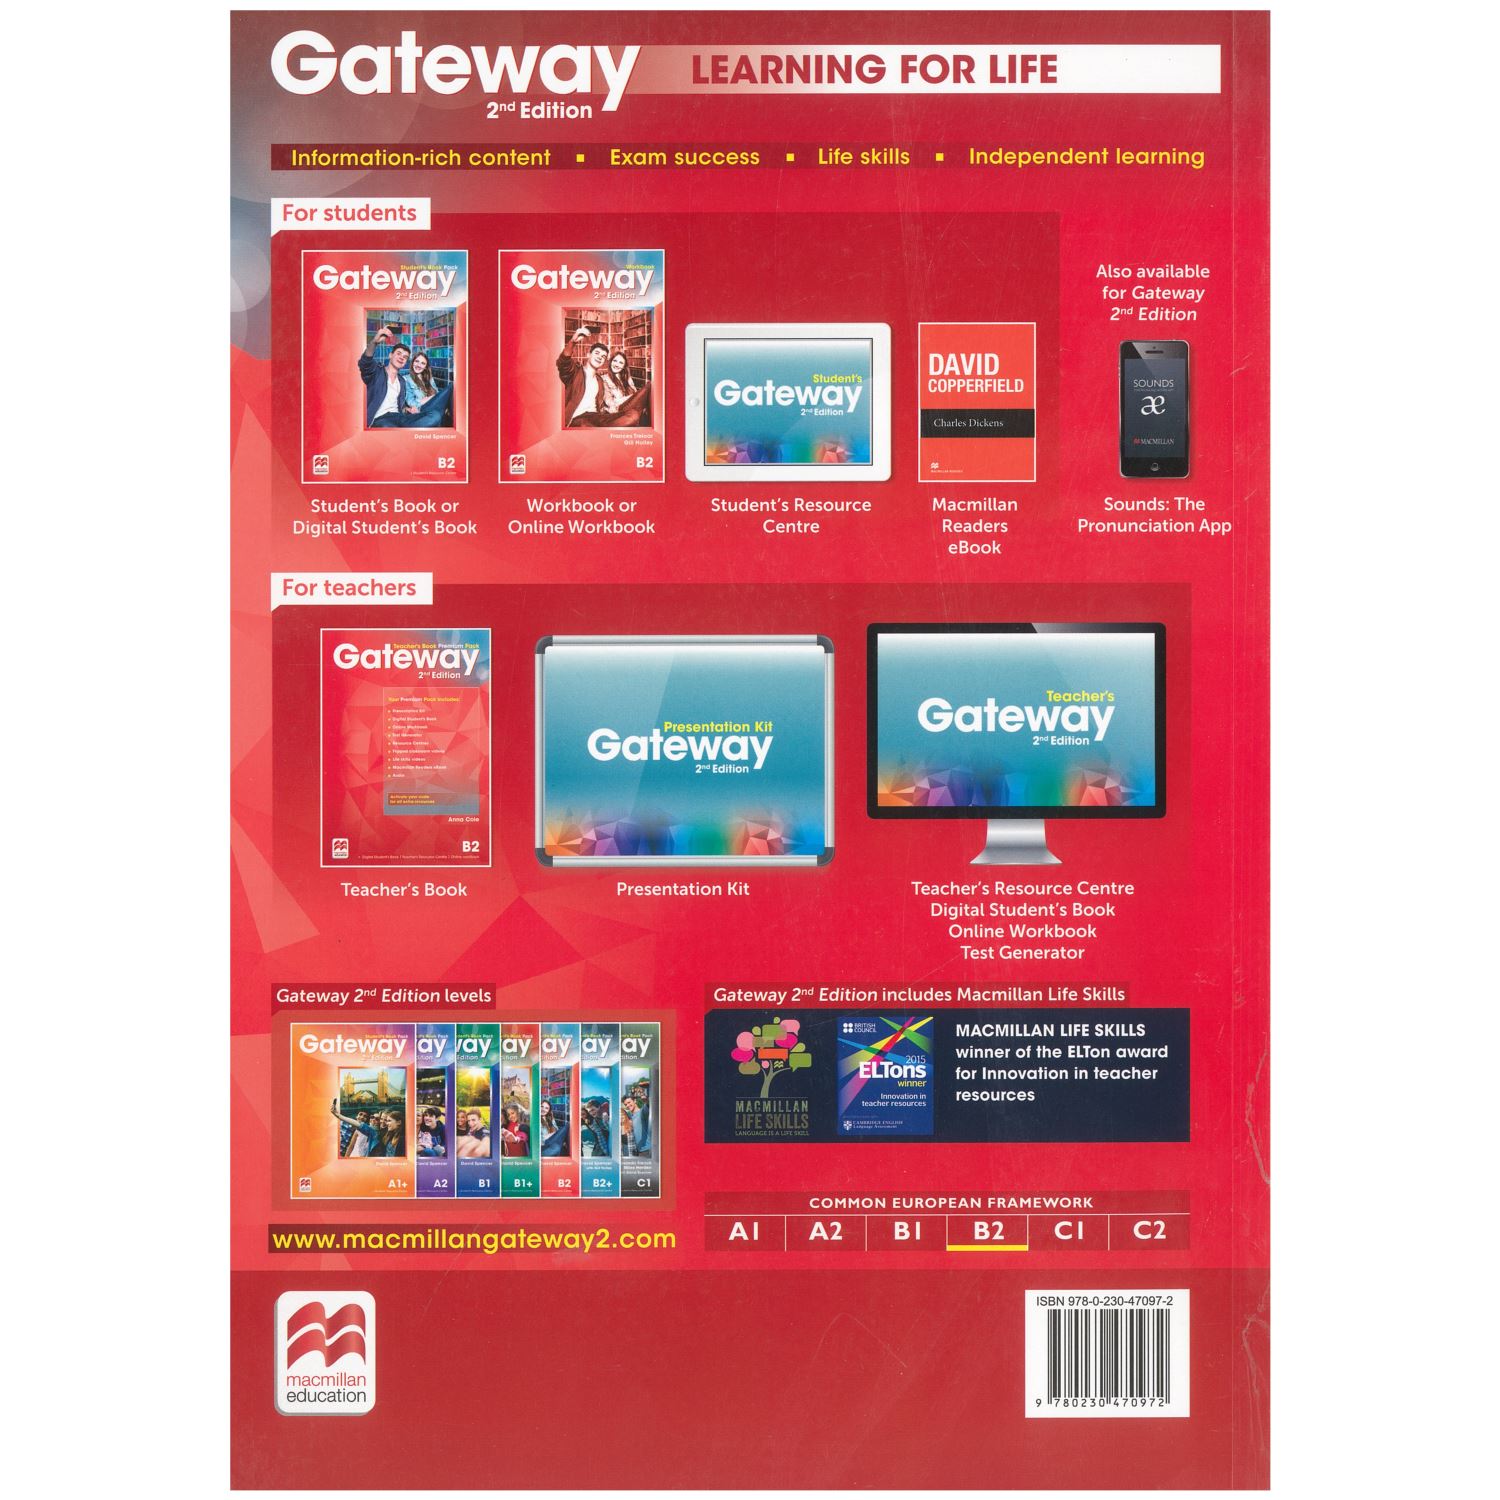 Gateway student s book answers. Гдз Gateway b2 Workbook. Gateway b2 student's book. Gateway b2 student book 2021. Gateway b2 resources.